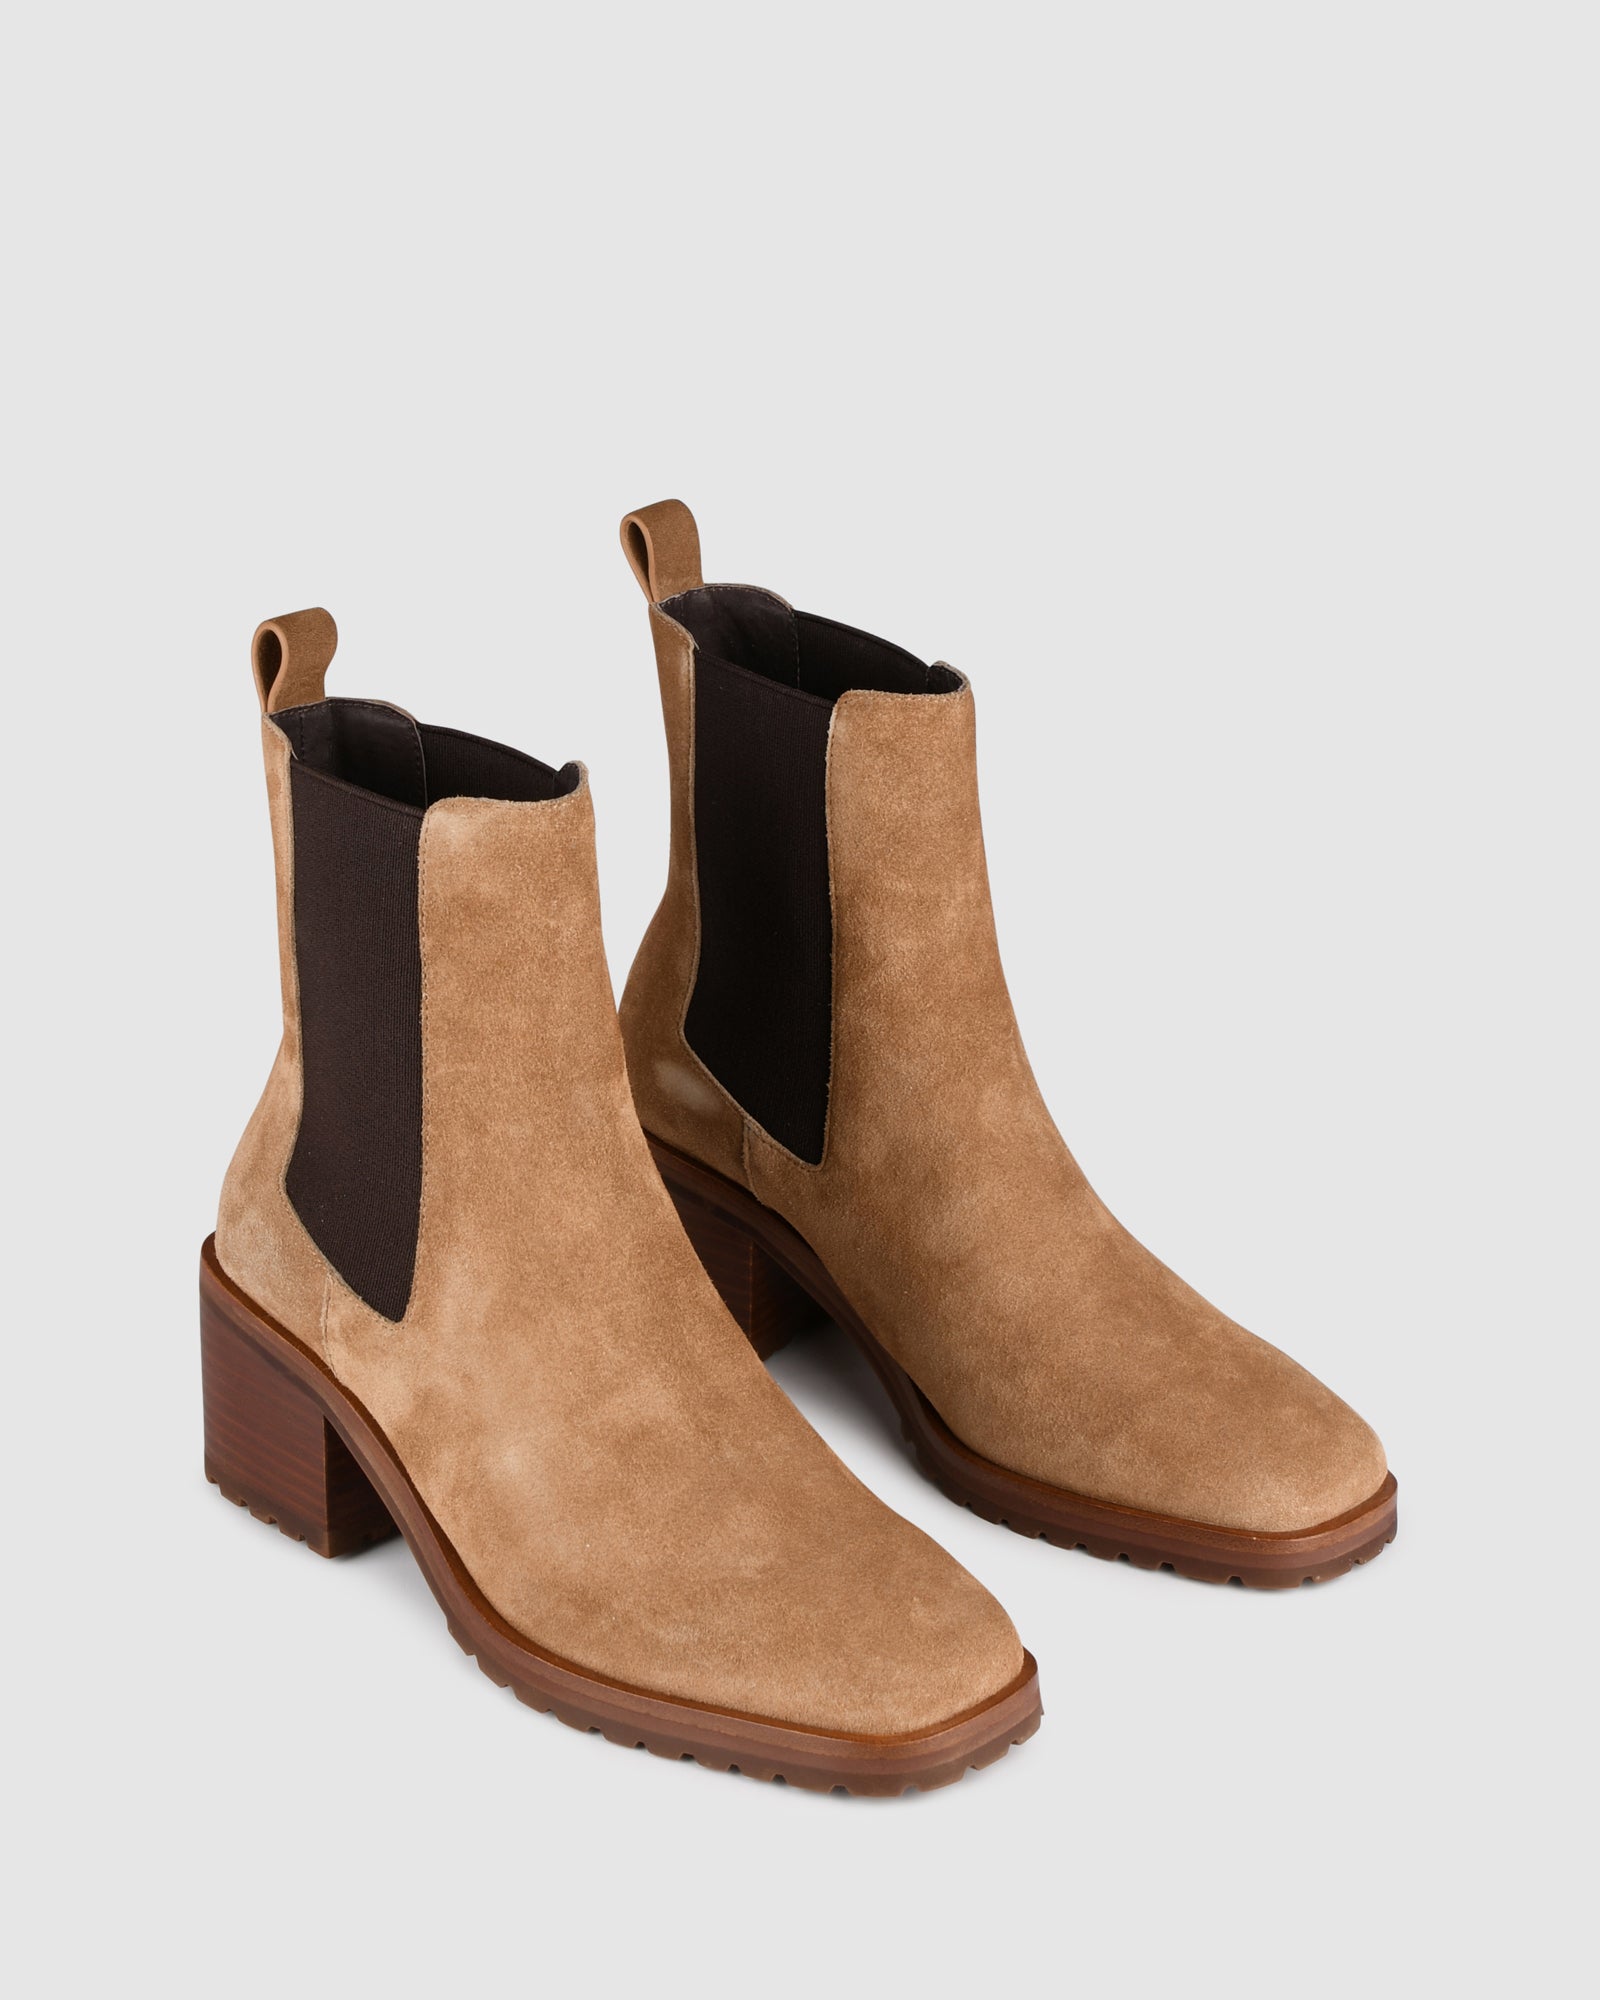 15 Comfortable Ankle Boots for Women 2023 — Comfortable Ankle Boots for Fall